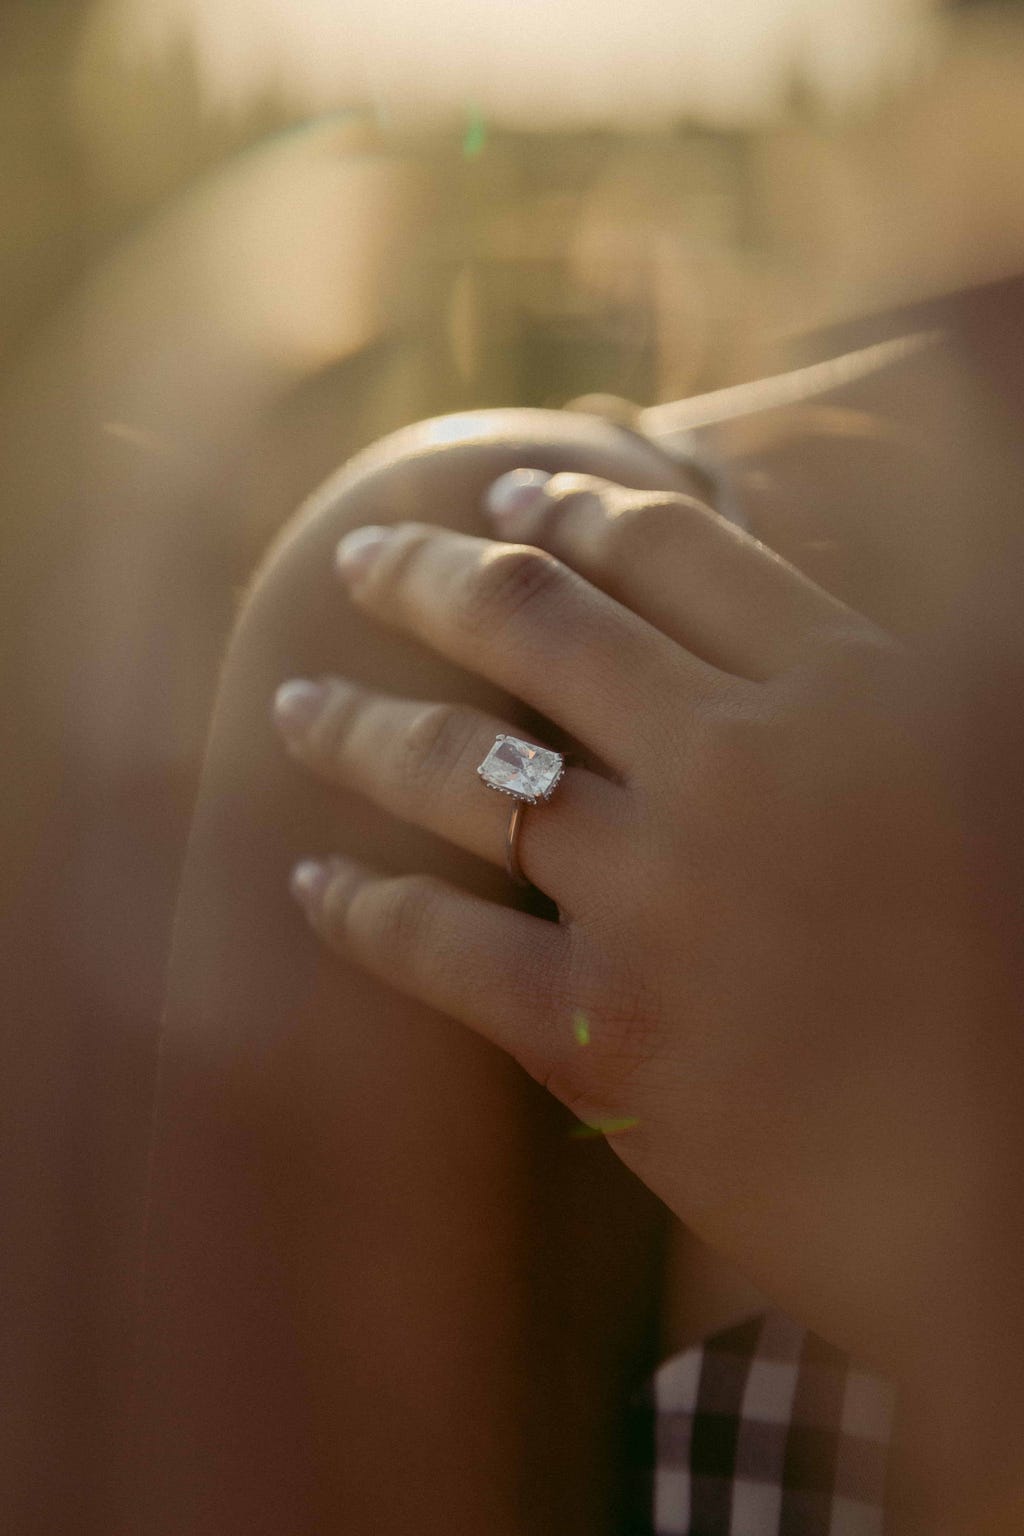 Photo of a diamond ring on a persons hand, which is resting on their shoulder. The picture is taken outside at dusk as the sun is fading.